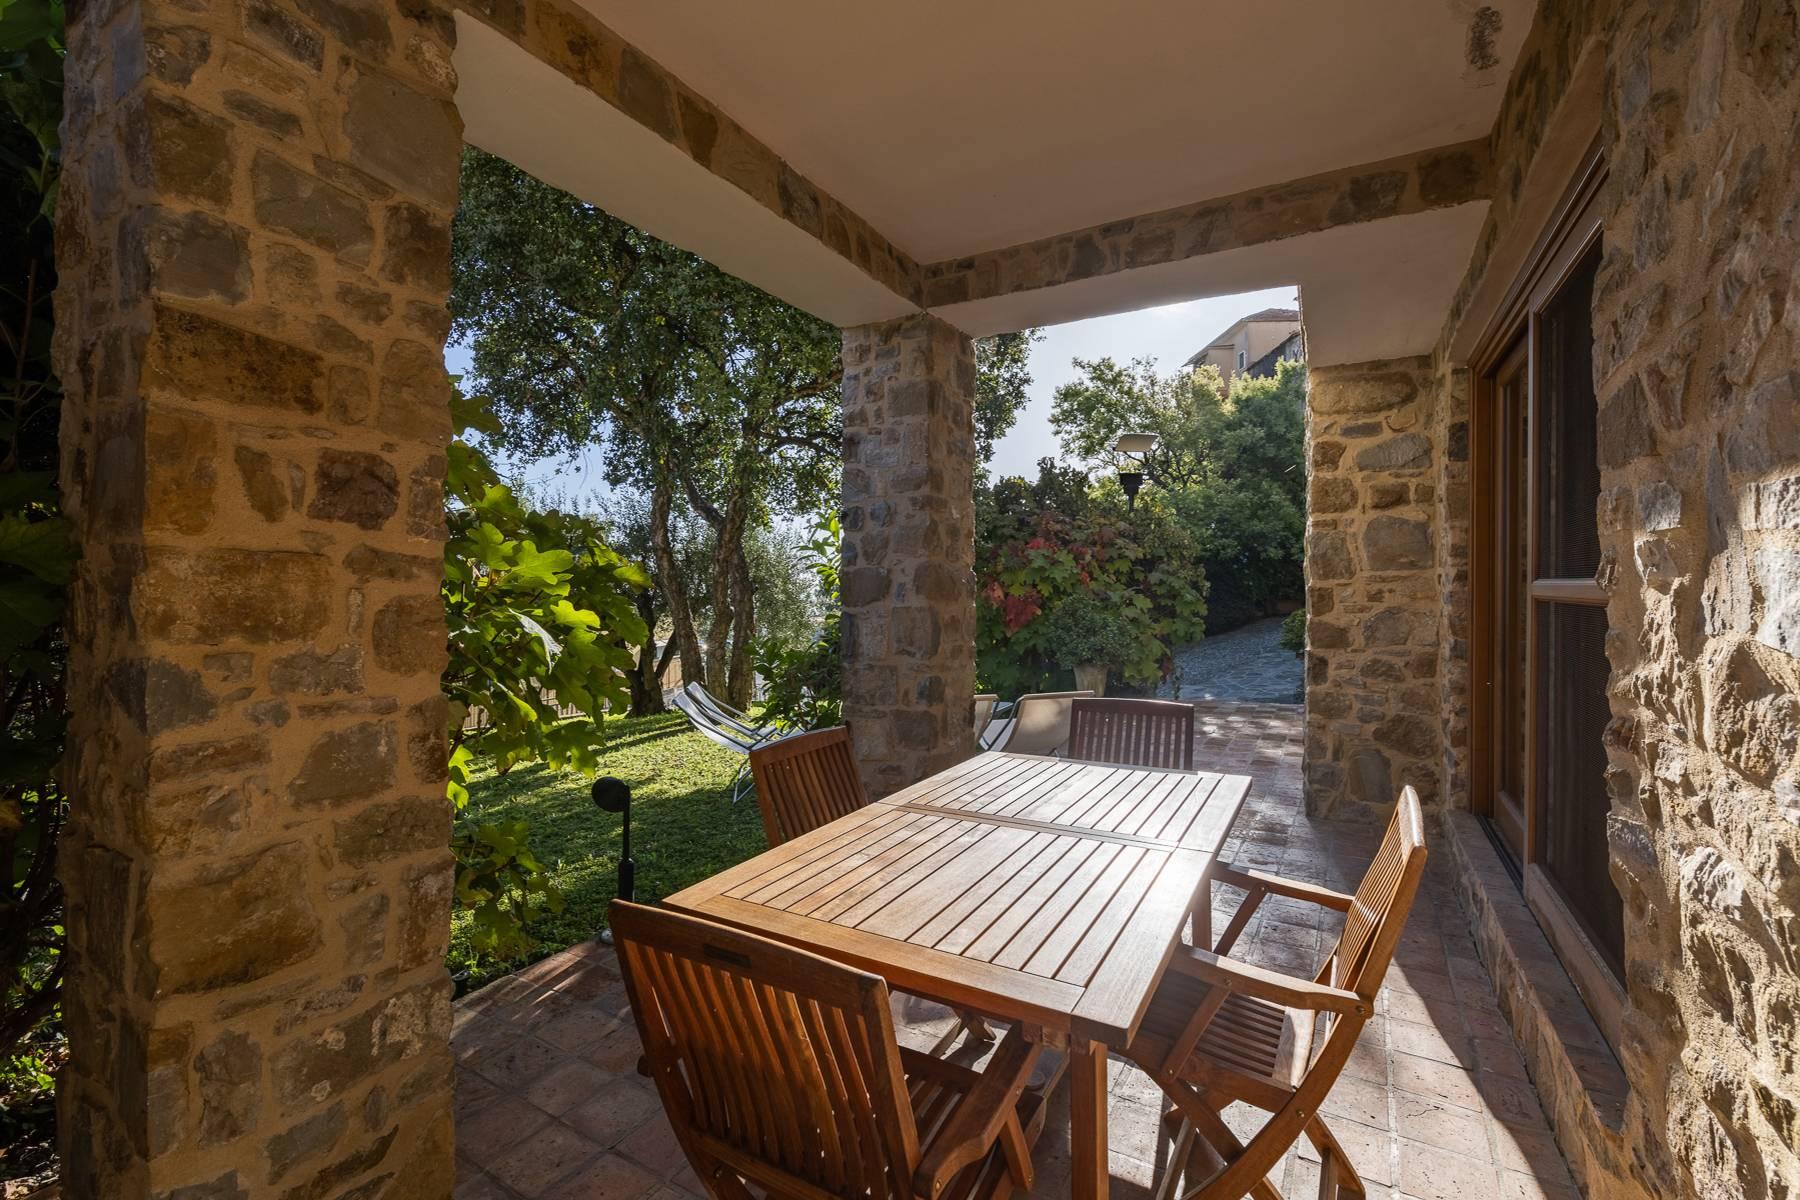 Charming villa in Torre Saracena, nestled in a tiny historic village overlooking Sanremo - Private Auction - 12